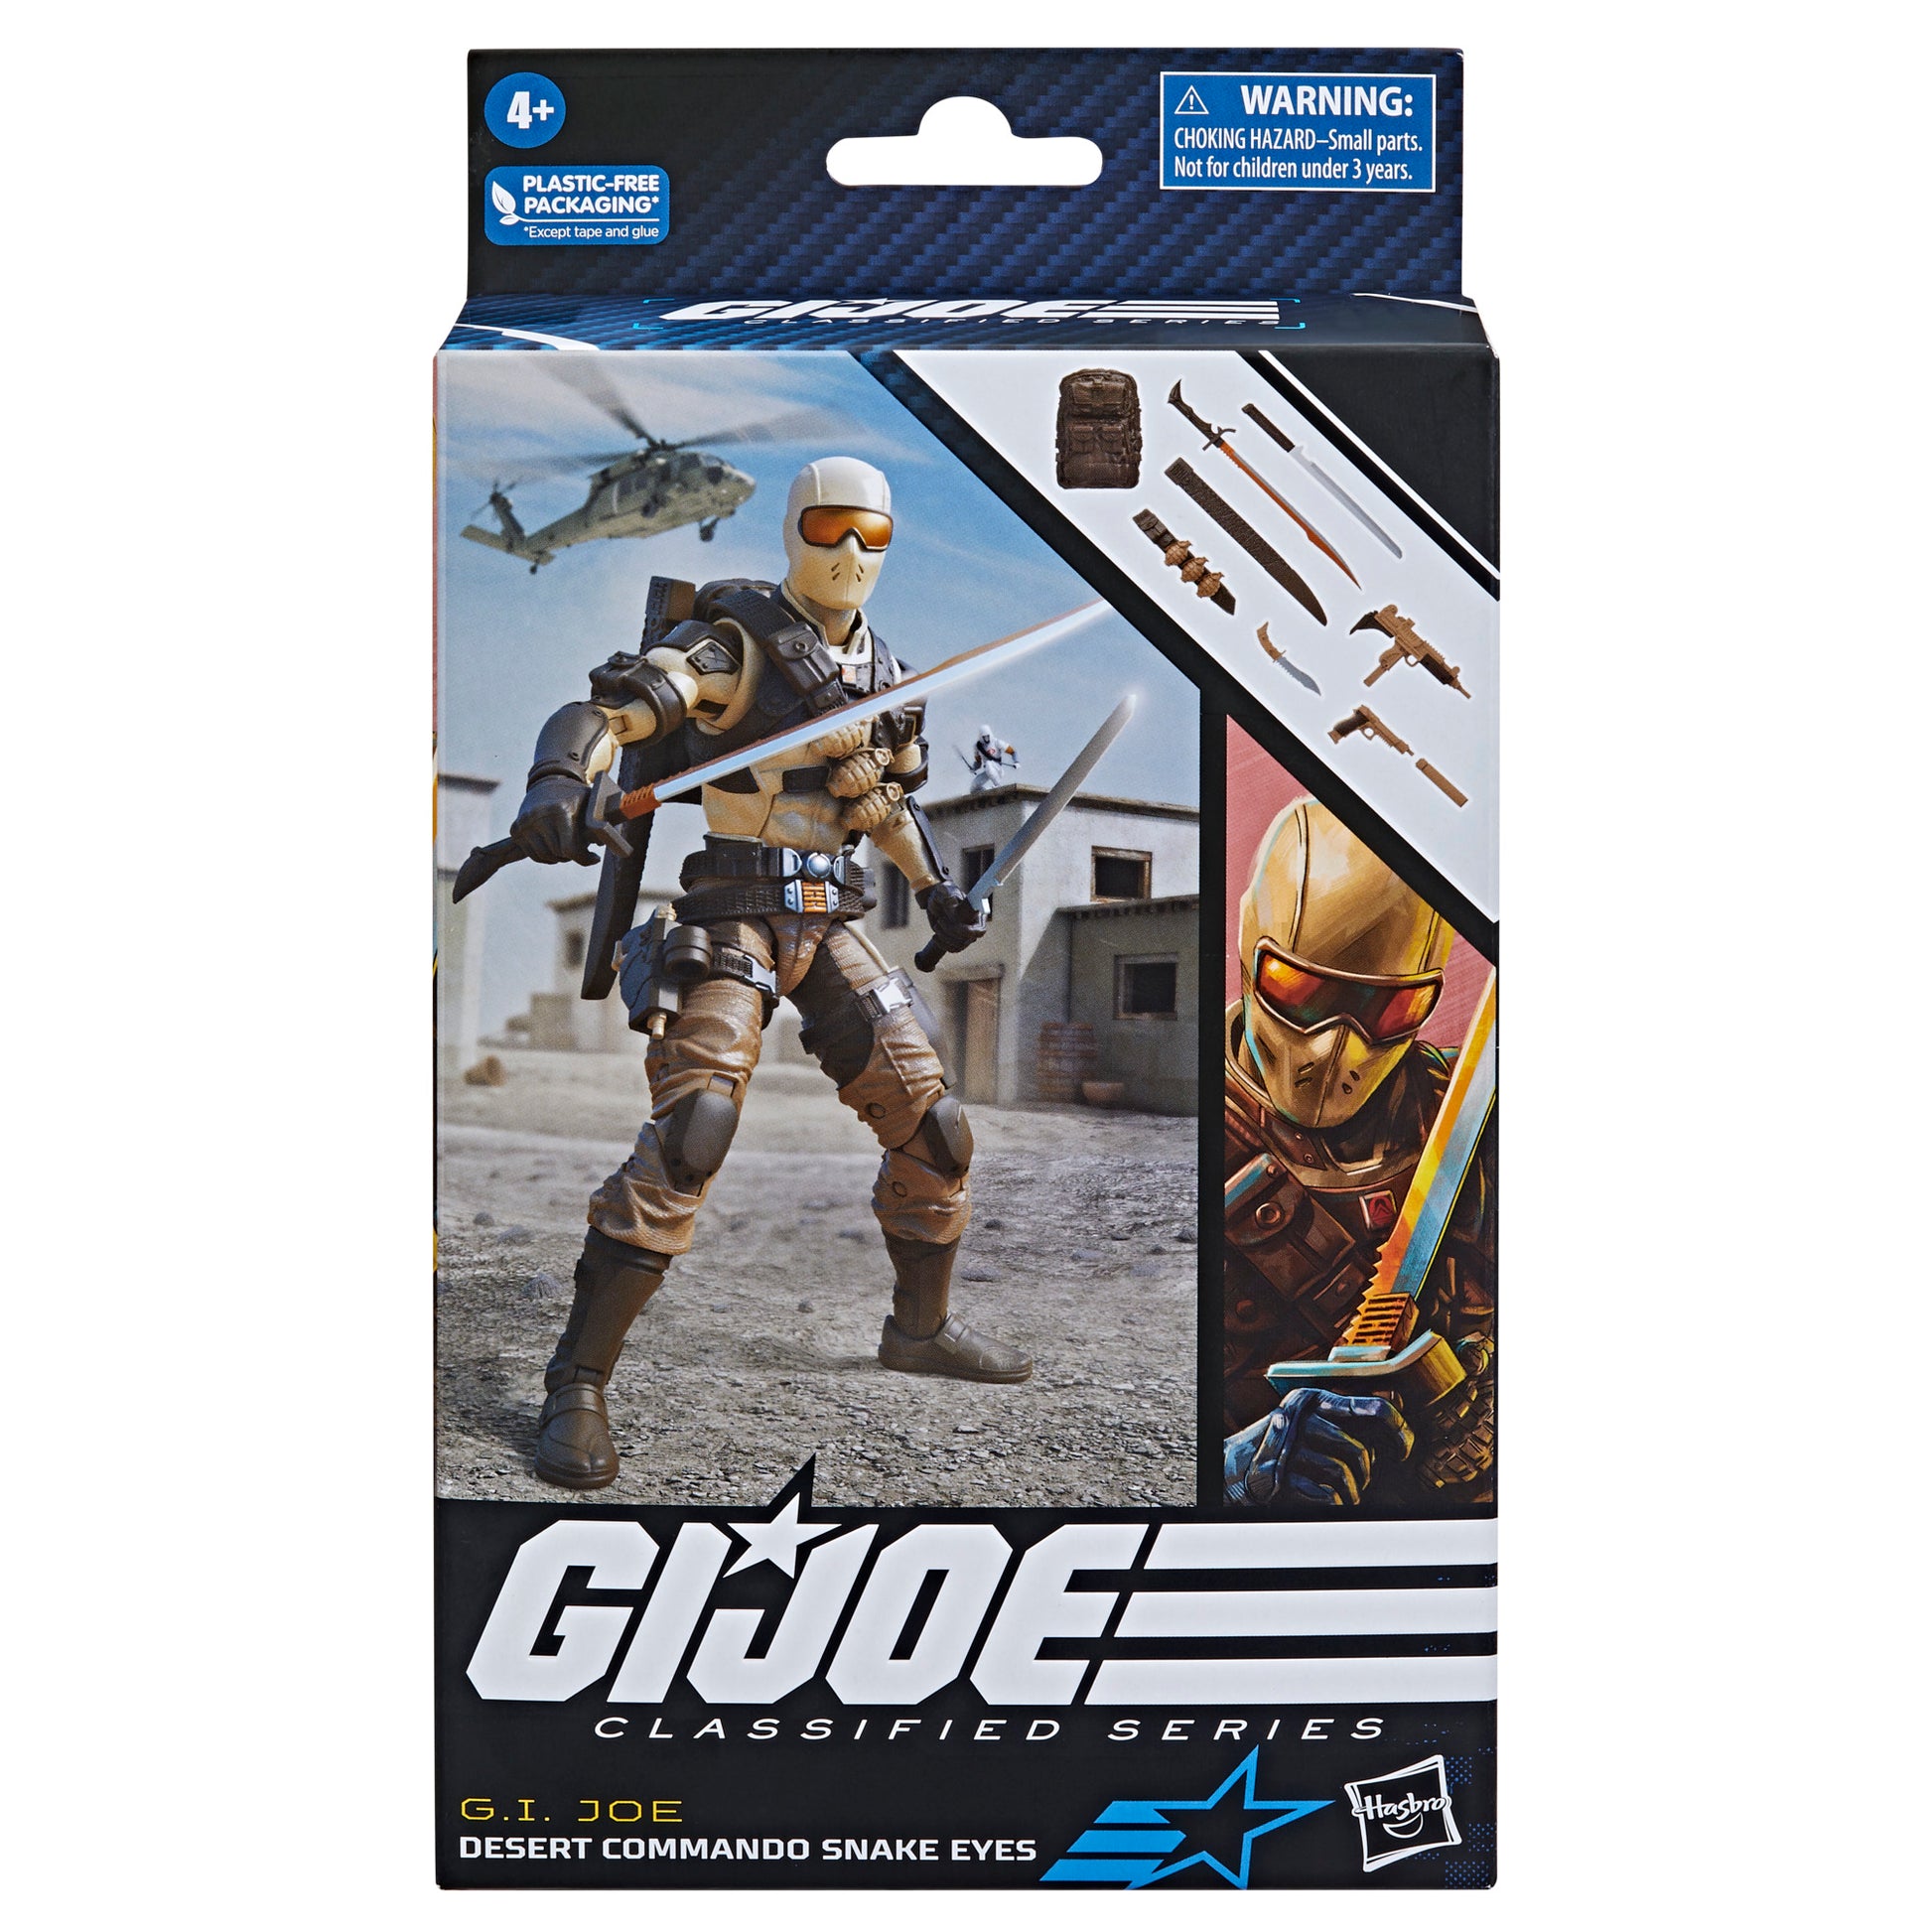 G.I. Joe Classified Series Desert Commando Snake Eyes front view in a box - Heretoserveyou